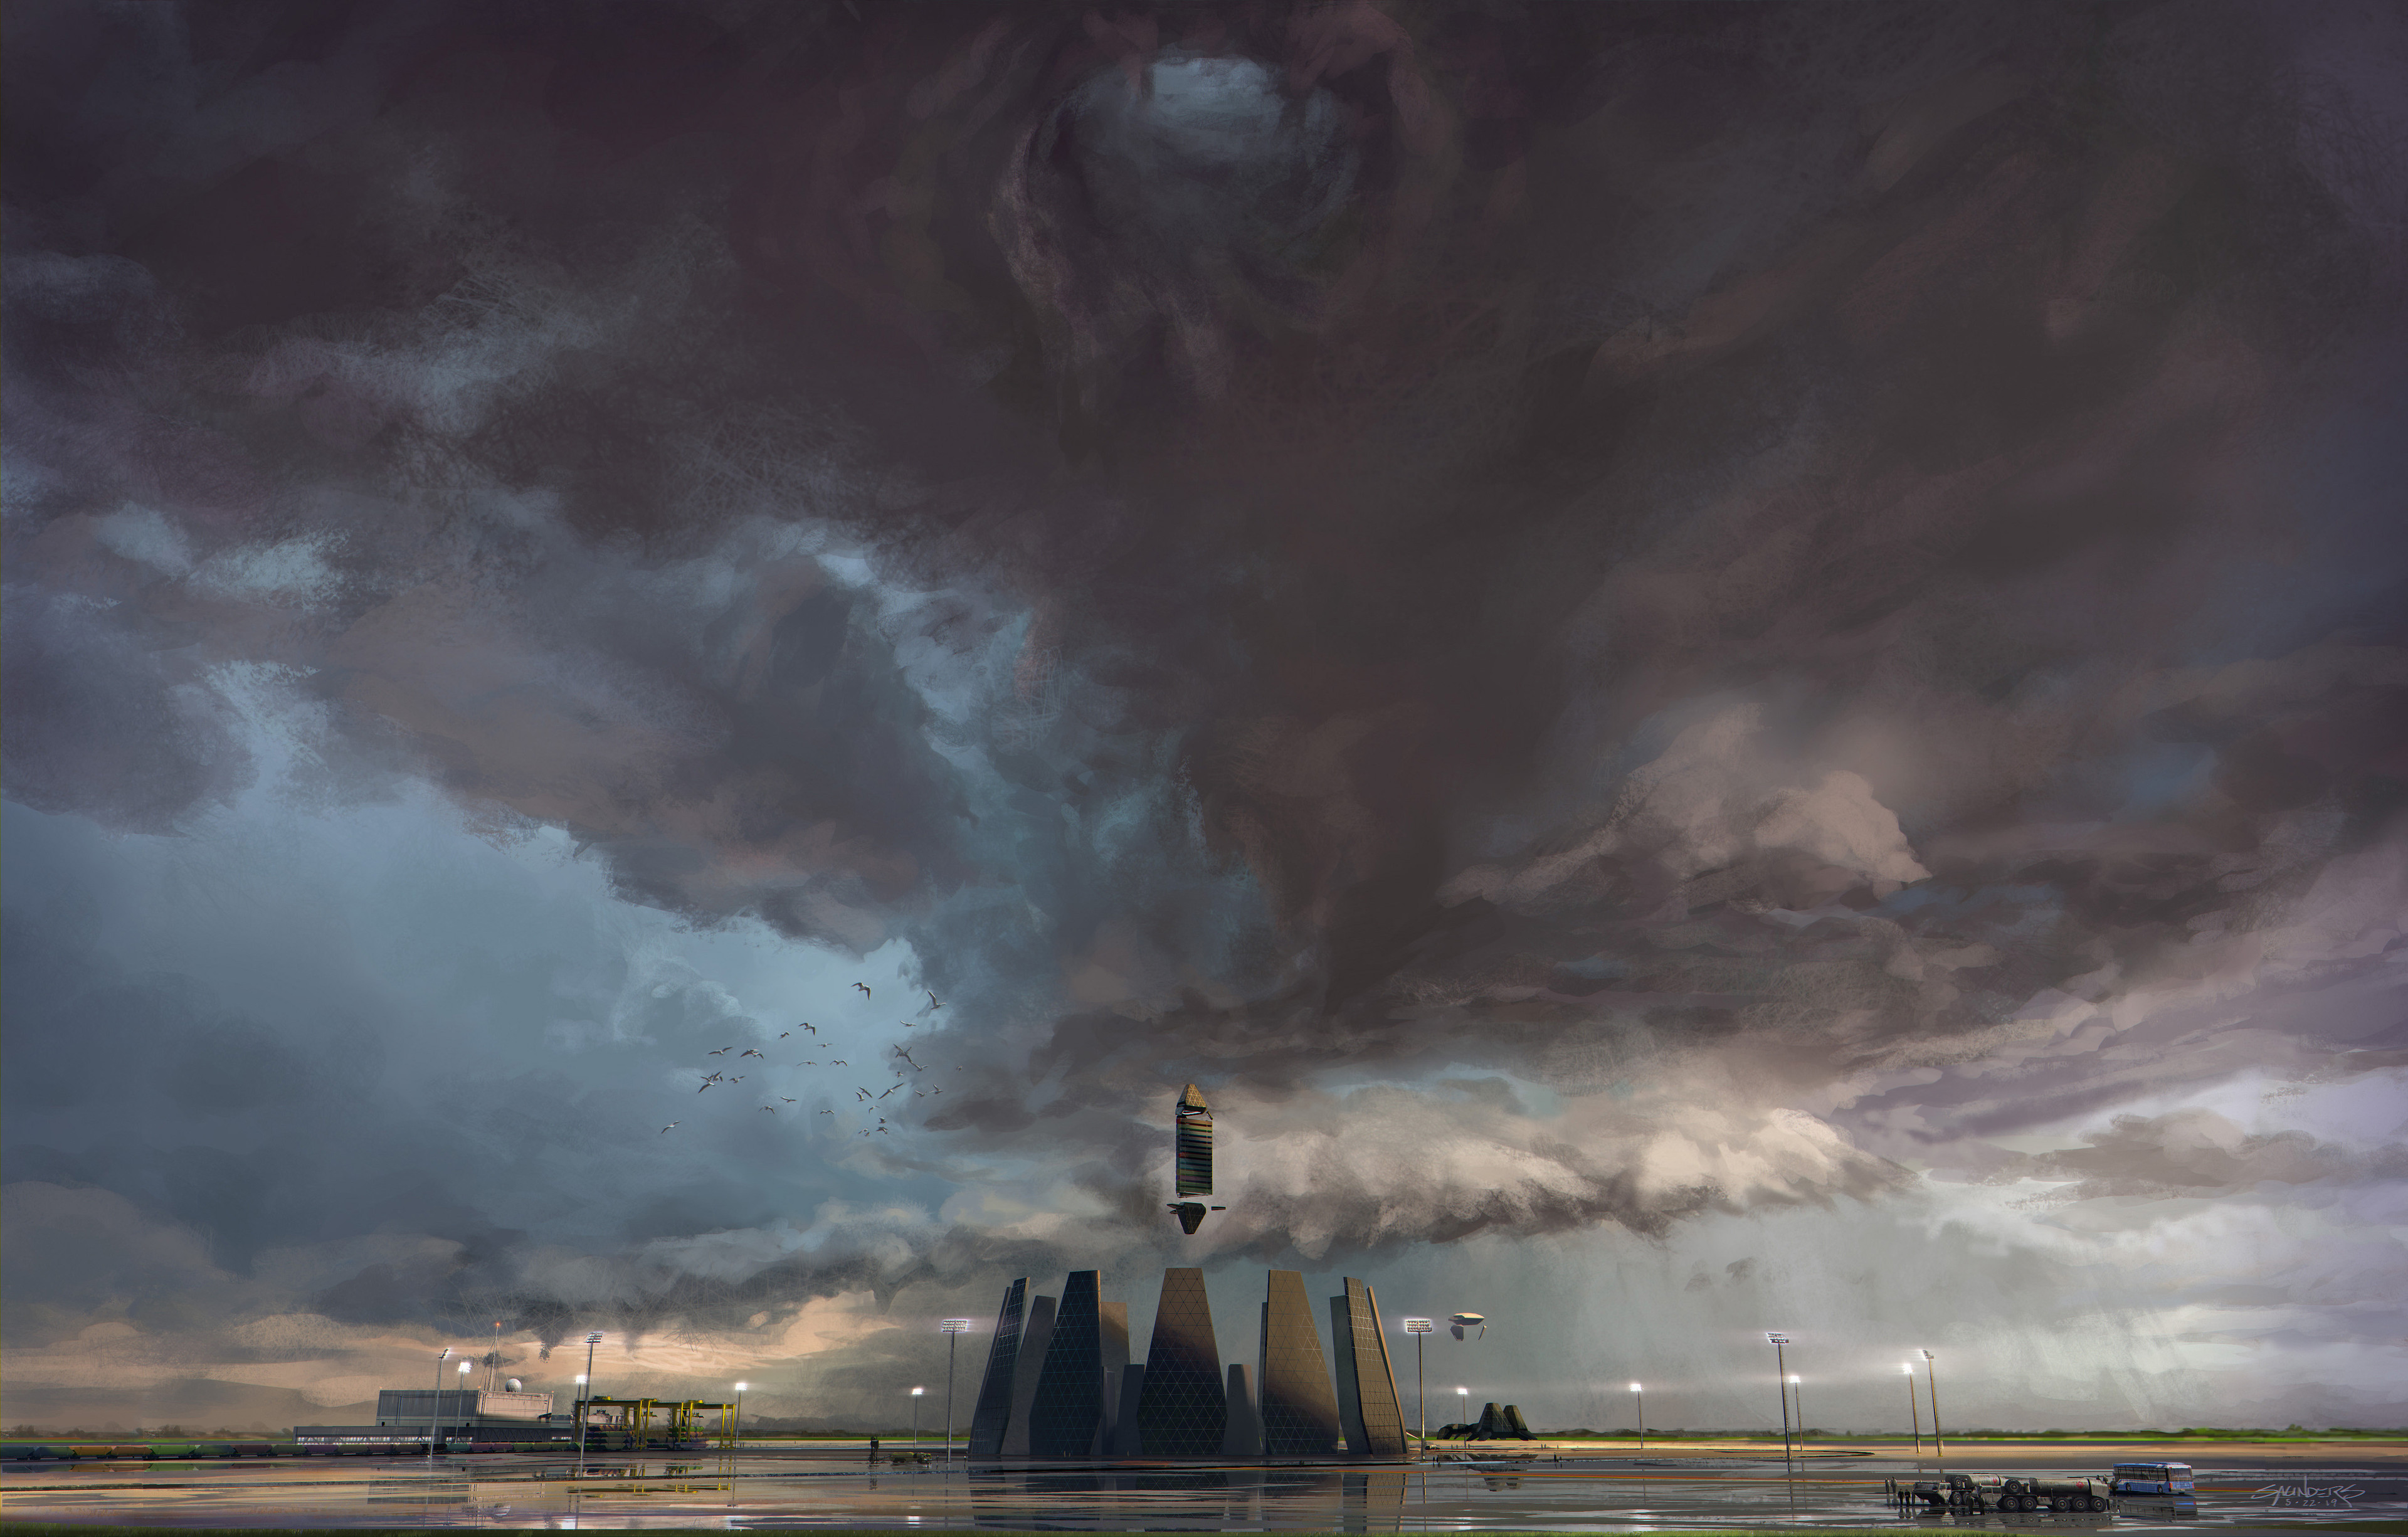 I really love painting clouds, though it's one of my toughest challenges, so this one was particularly fun!